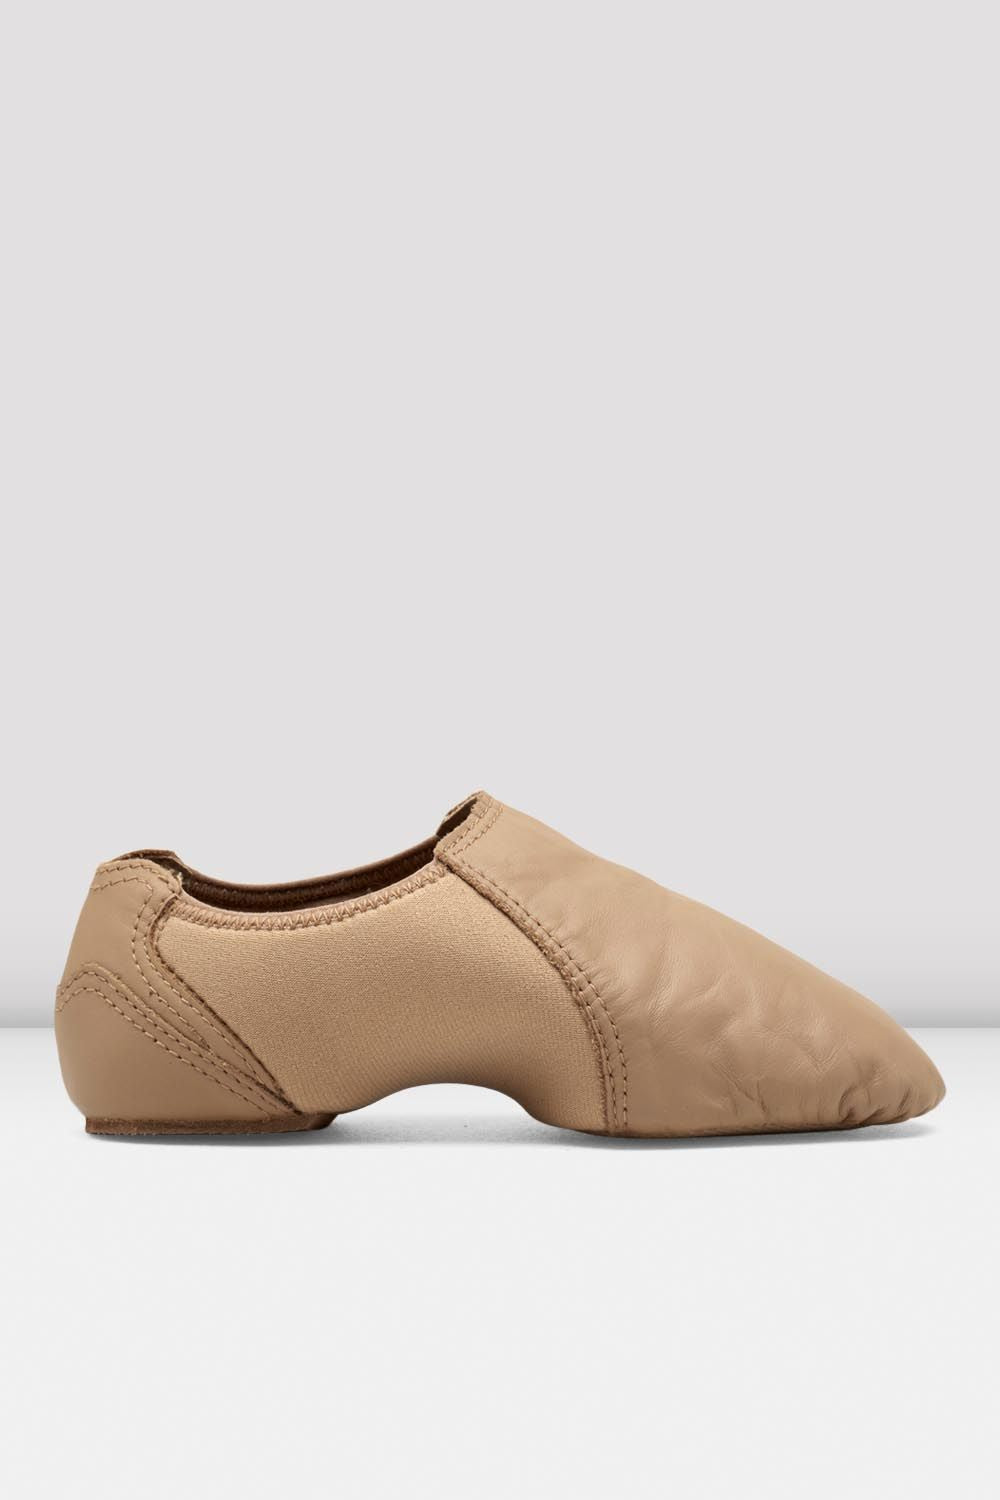 BLOCH Childrens Spark Leather & Neoprene Jazz Shoes, Tan Leather